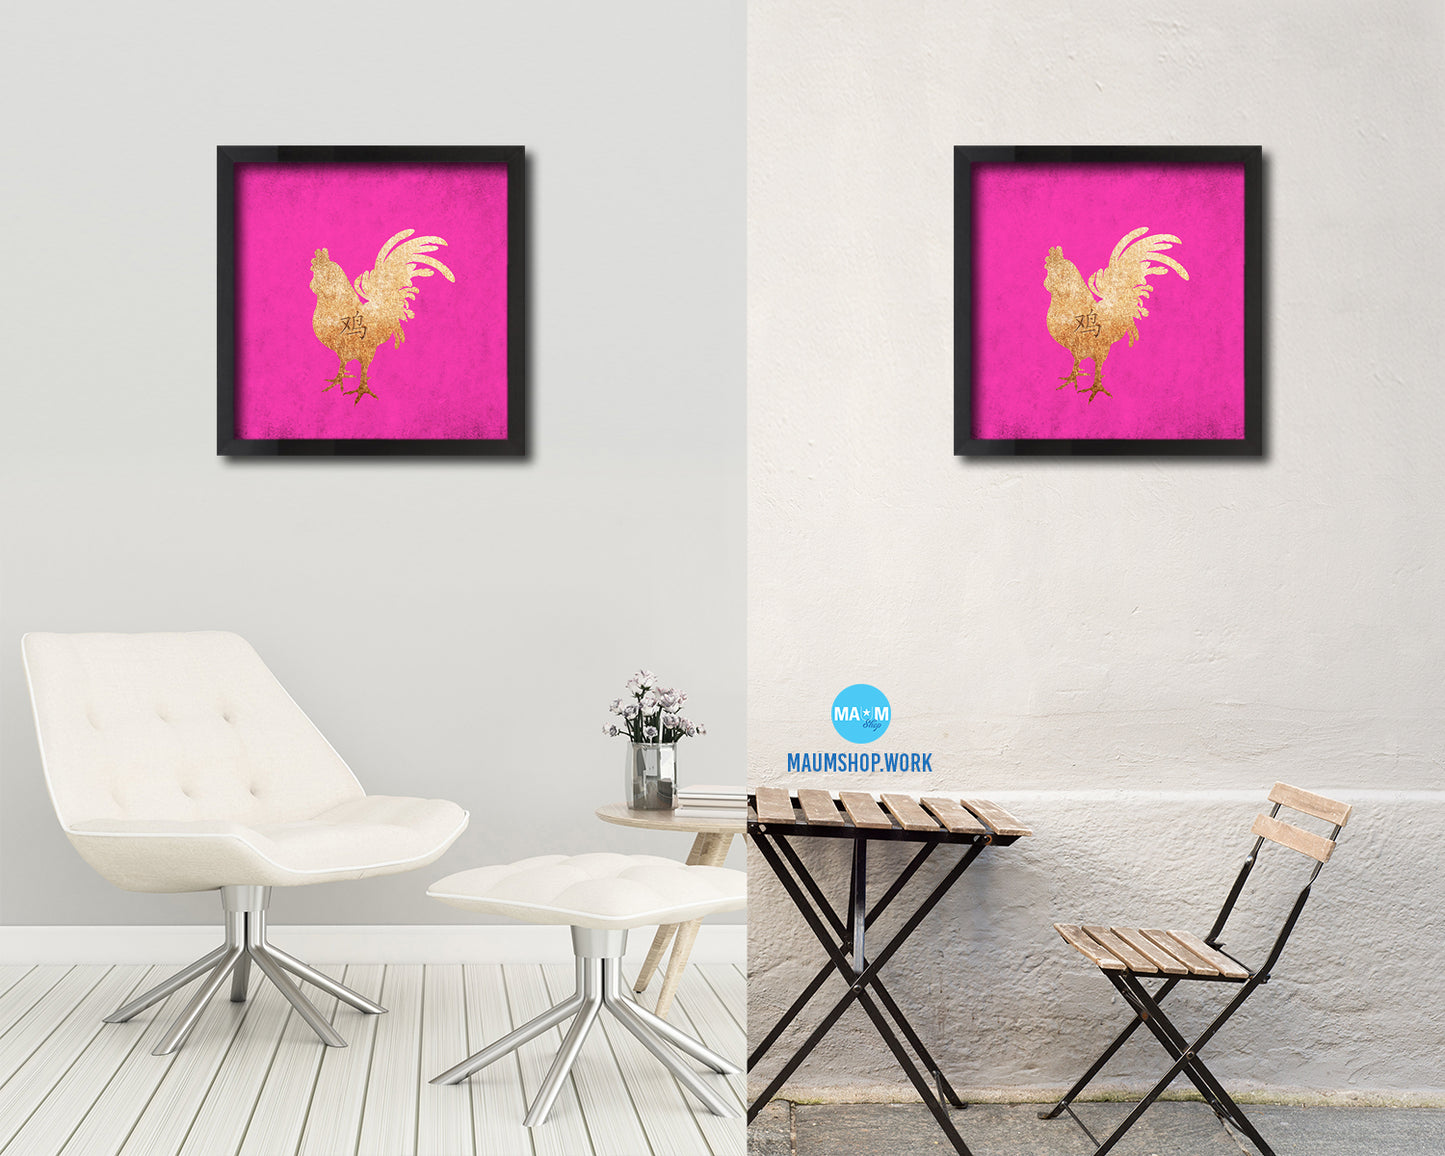 Rooster Chinese Zodiac Character Wood Framed Print Wall Art Decor Gifts, Pink